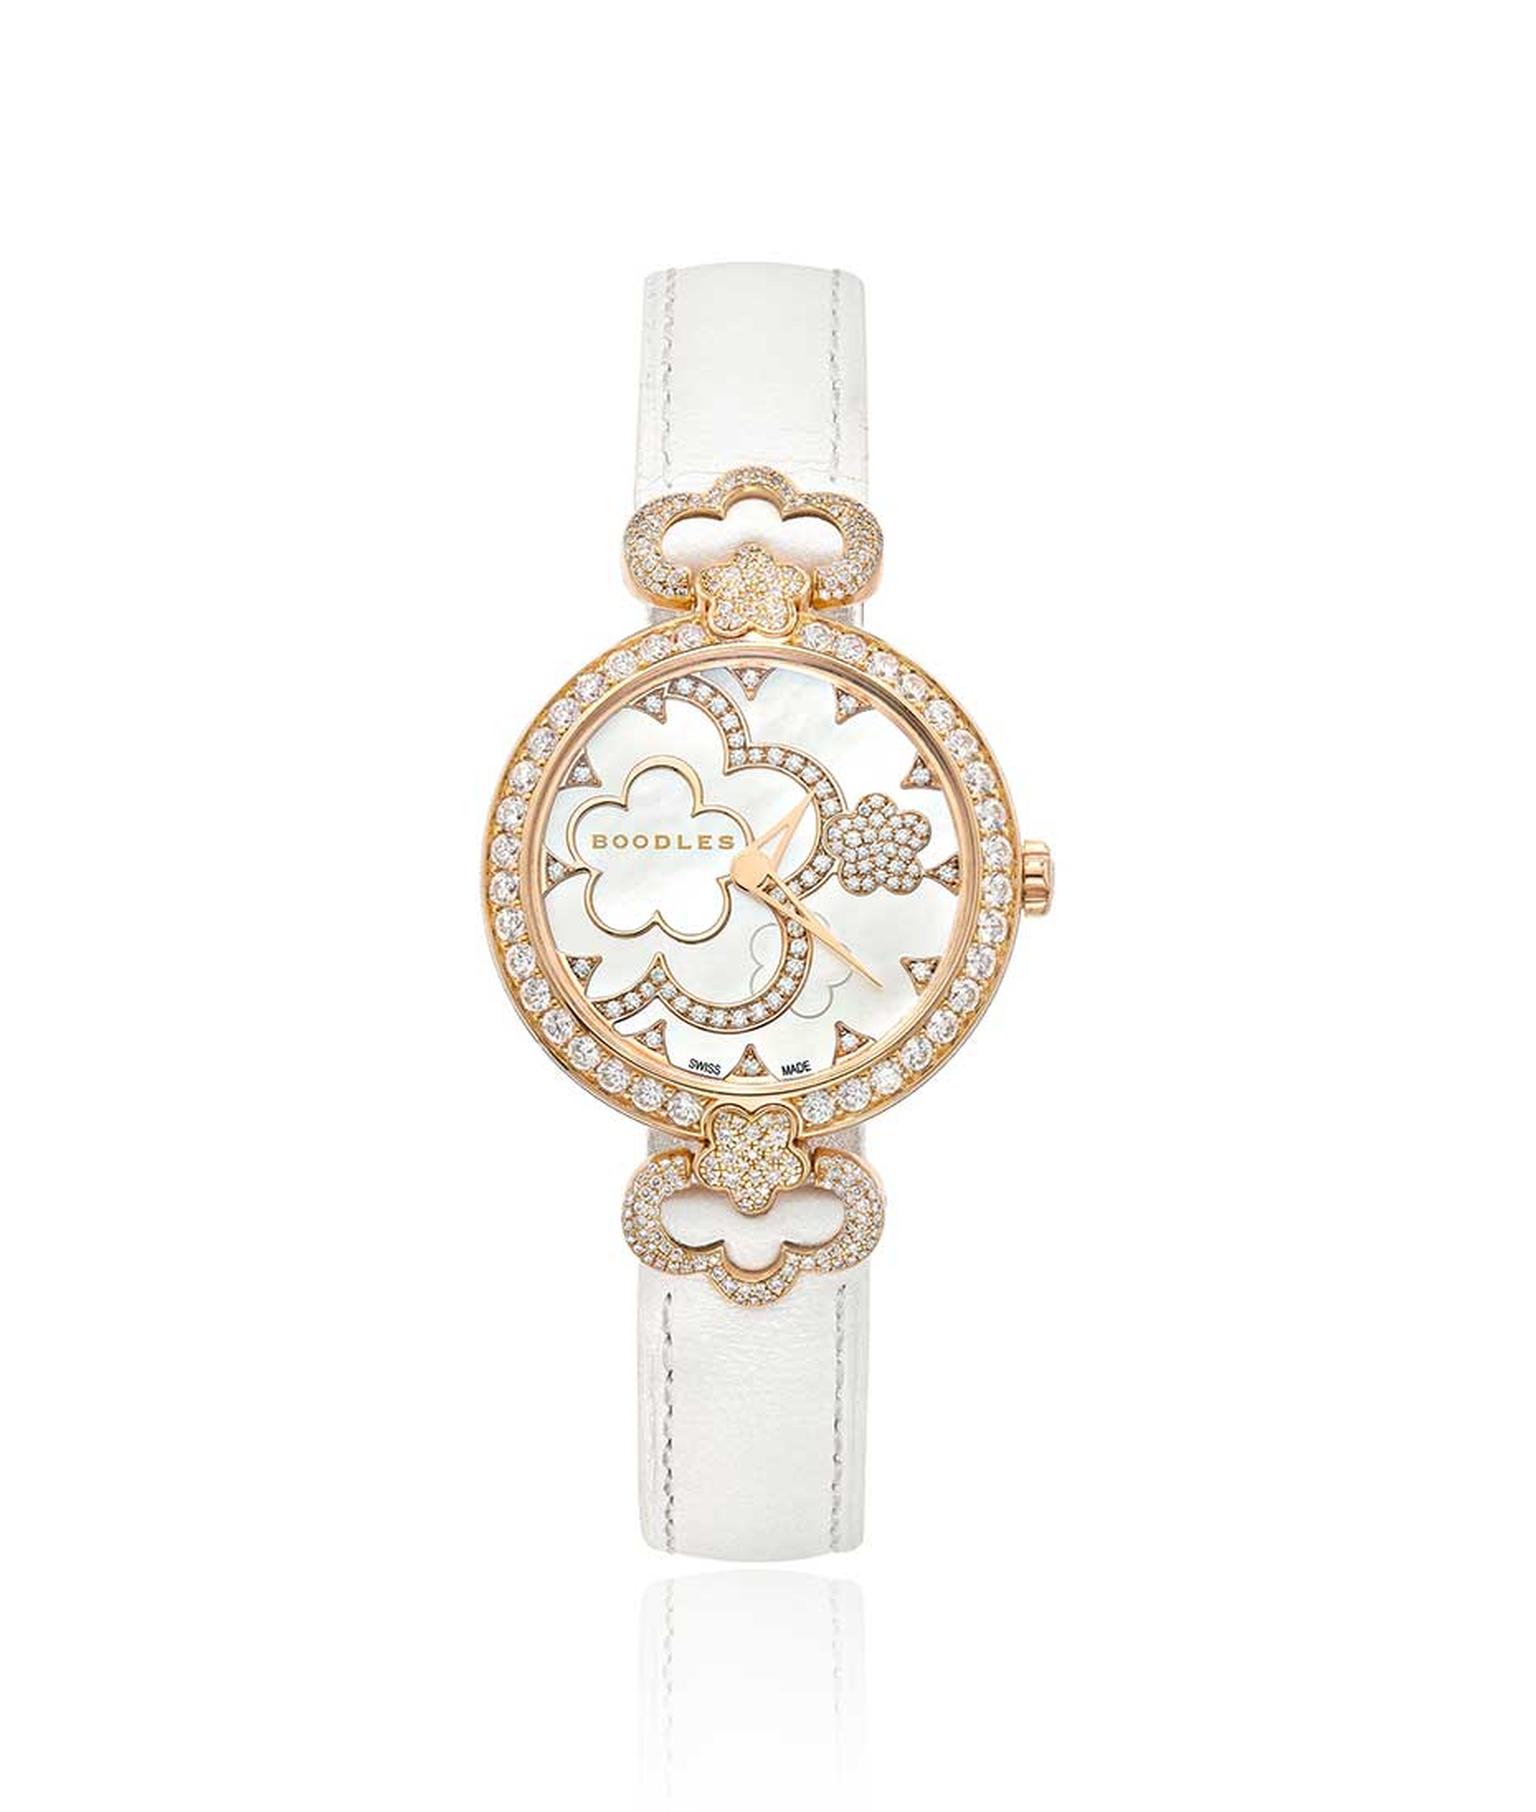 The new Boodles Blossom watch: a precious as well as functional piece of high jewellery for the wrist